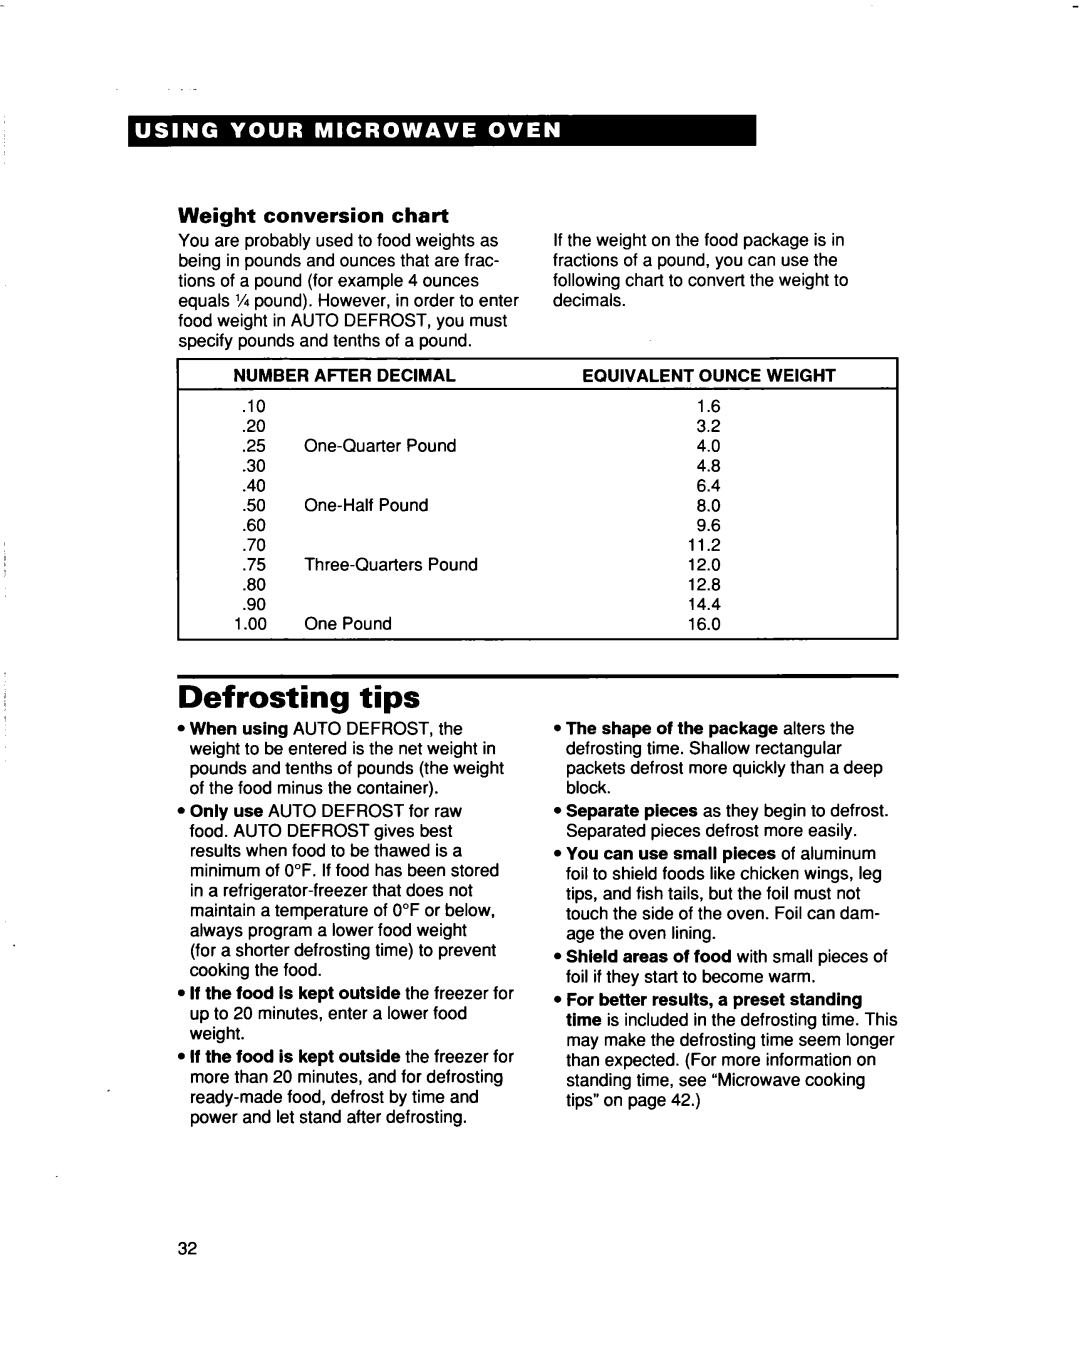 Whirlpool MHEI IRD warranty Defrosting tips, Weight conversion chart, I Number After Decimal, Equivalent Ounce Weight 